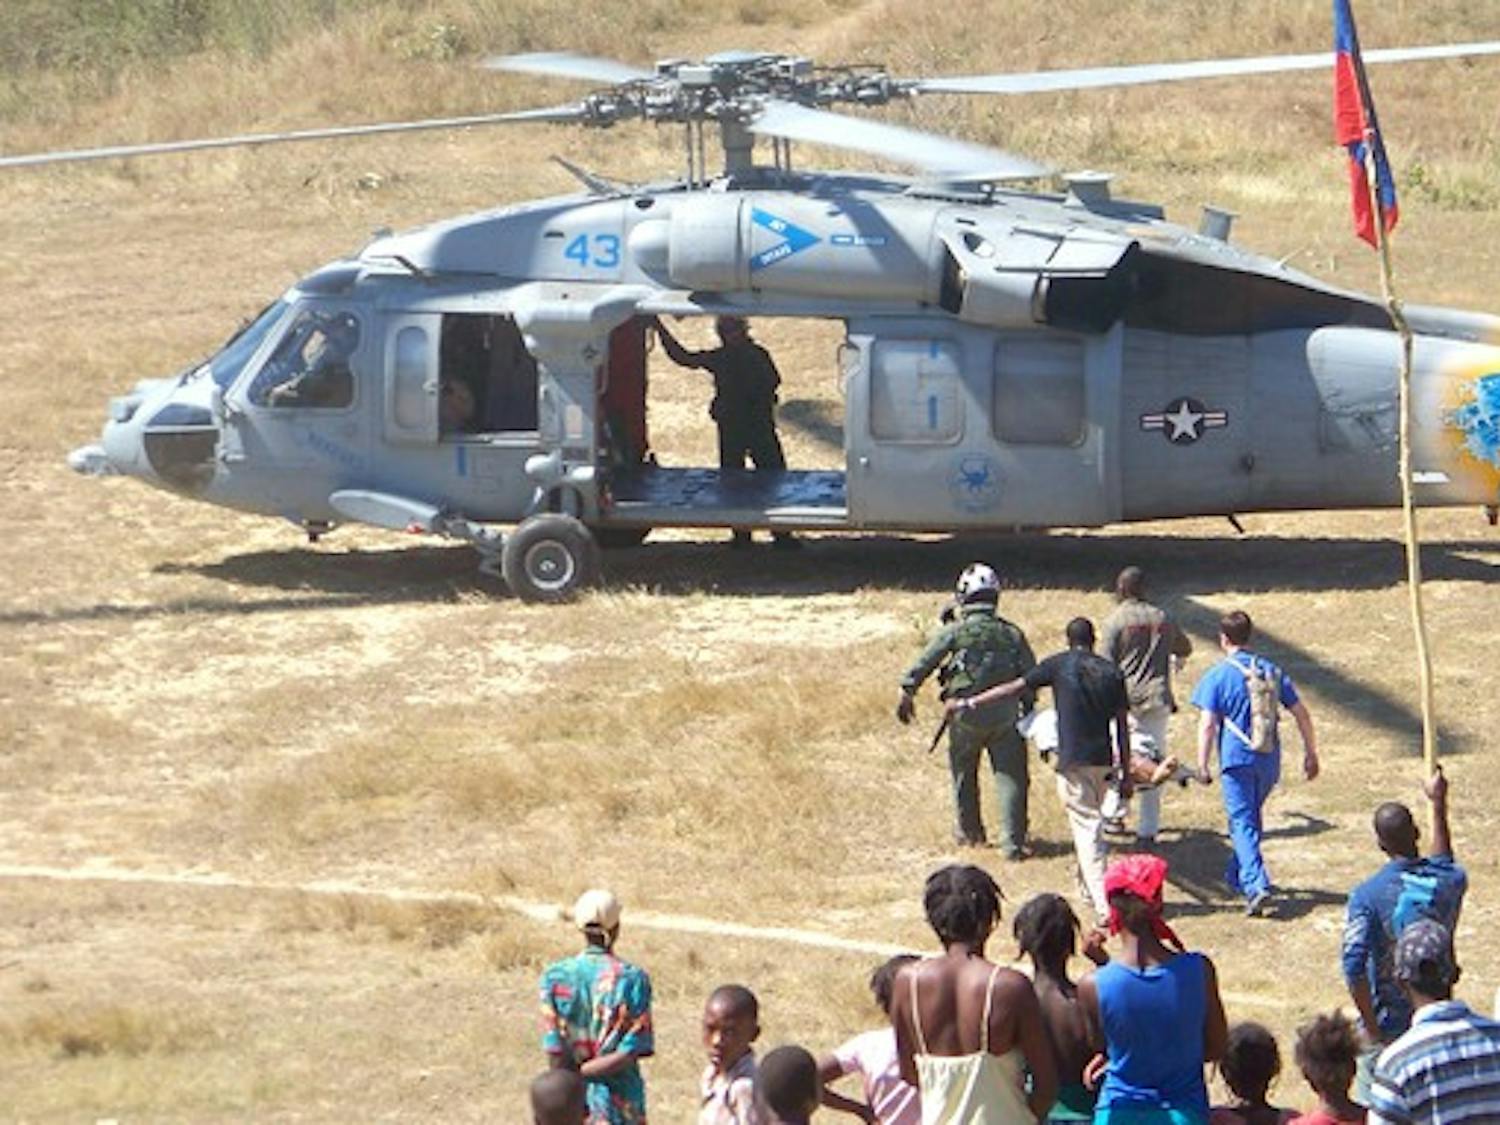 The Duke medical team in Haiti evacuates an earthquake victim via helicopter to the USNS Comfort, a navy hospital ship, for surgical treatment.